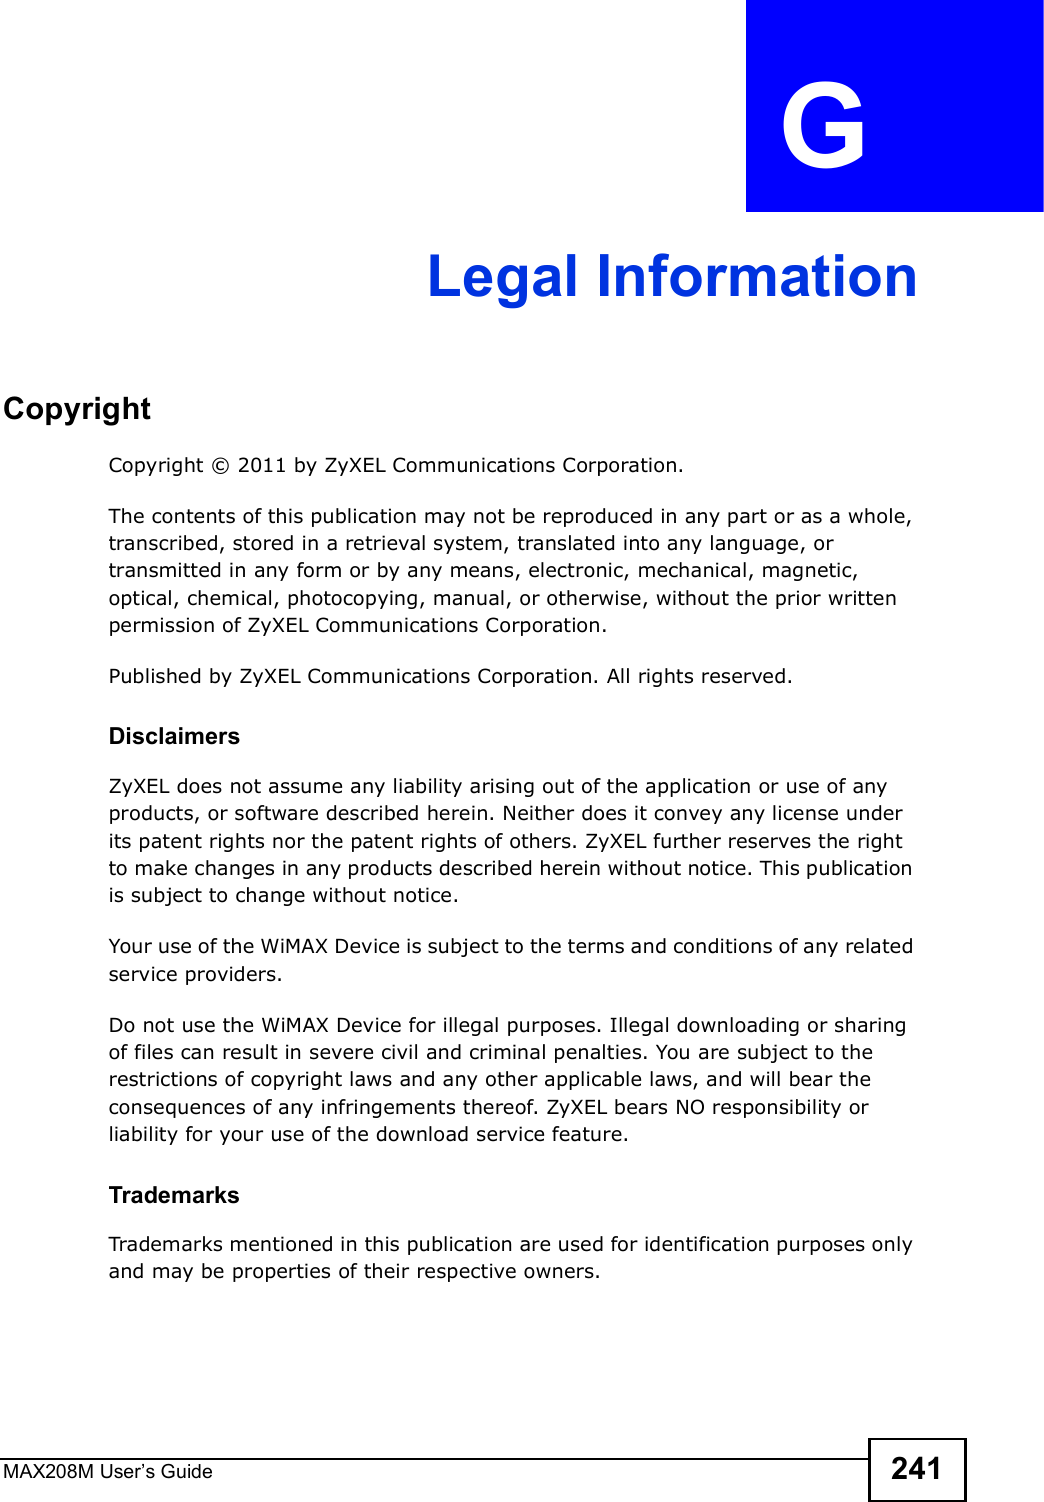 MAX208M User s Guide 241APPENDIX  G Legal InformationCopyrightCopyright © 2011 by ZyXEL Communications Corporation.The contents of this publication may not be reproduced in any part or as a whole, transcribed, stored in a retrieval system, translated into any language, or transmitted in any form or by any means, electronic, mechanical, magnetic, optical, chemical, photocopying, manual, or otherwise, without the prior written permission of ZyXEL Communications Corporation.Published by ZyXEL Communications Corporation. All rights reserved.DisclaimersZyXEL does not assume any liability arising out of the application or use of any products, or software described herein. Neither does it convey any license under its patent rights nor the patent rights of others. ZyXEL further reserves the right to make changes in any products described herein without notice. This publication is subject to change without notice.Your use of the WiMAX Device is subject to the terms and conditions of any related service providers.Do not use the WiMAX Device for illegal purposes. Illegal downloading or sharing of files can result in severe civil and criminal penalties. You are subject to the restrictions of copyright laws and any other applicable laws, and will bear the consequences of any infringements thereof. ZyXEL bears NO responsibility or liability for your use of the download service feature.TrademarksTrademarks mentioned in this publication are used for identification purposes only and may be properties of their respective owners.